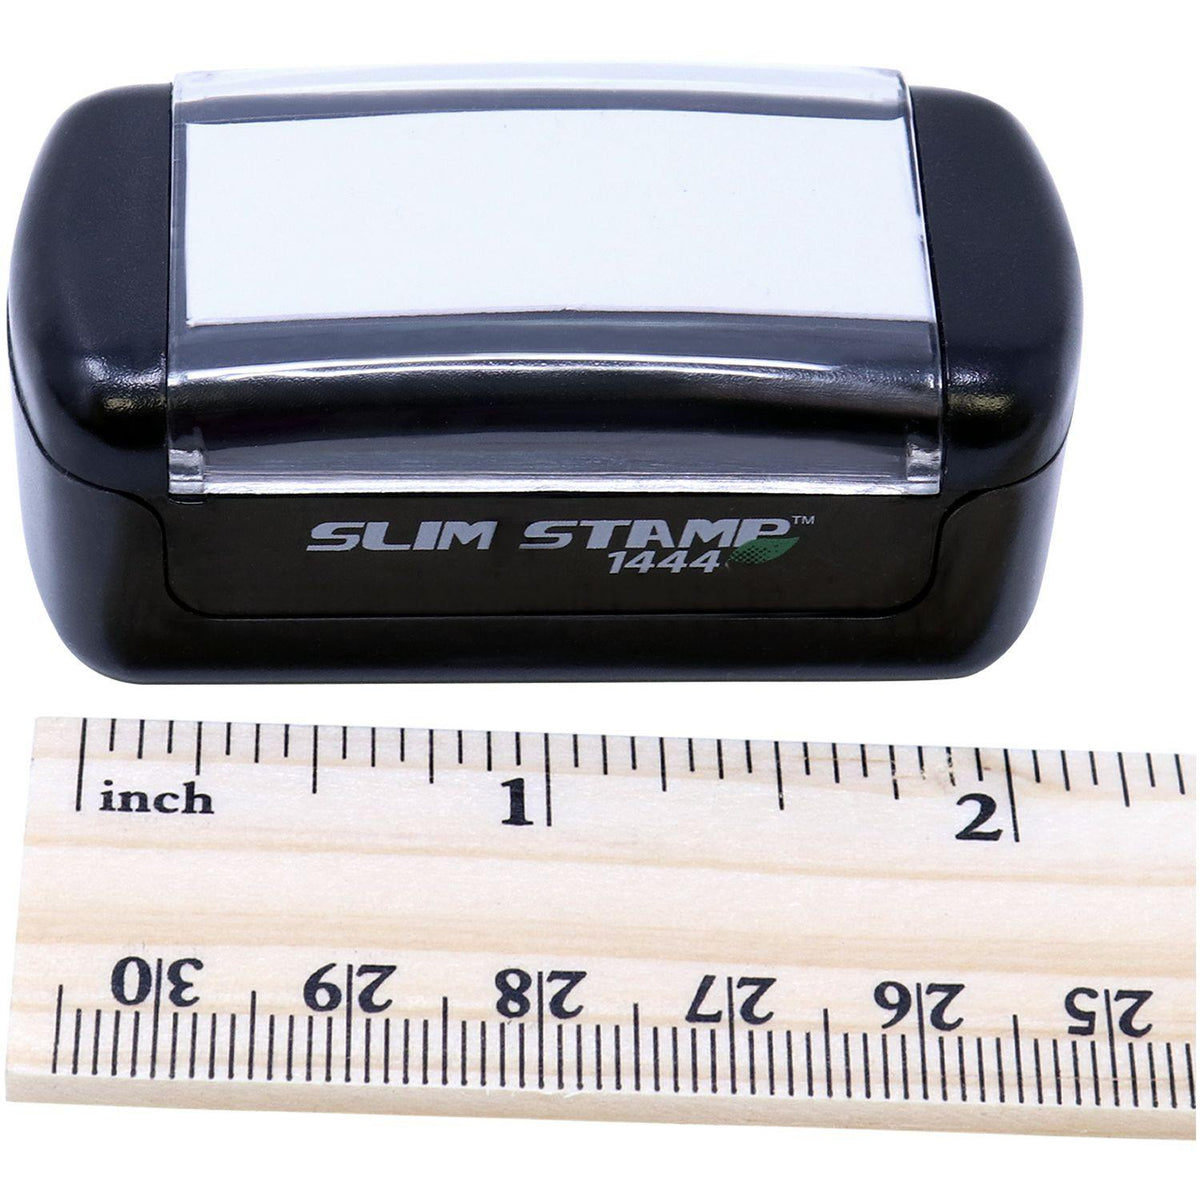 Measurement Slim Pre-Inked Covid-19 Tested Stamp with Ruler